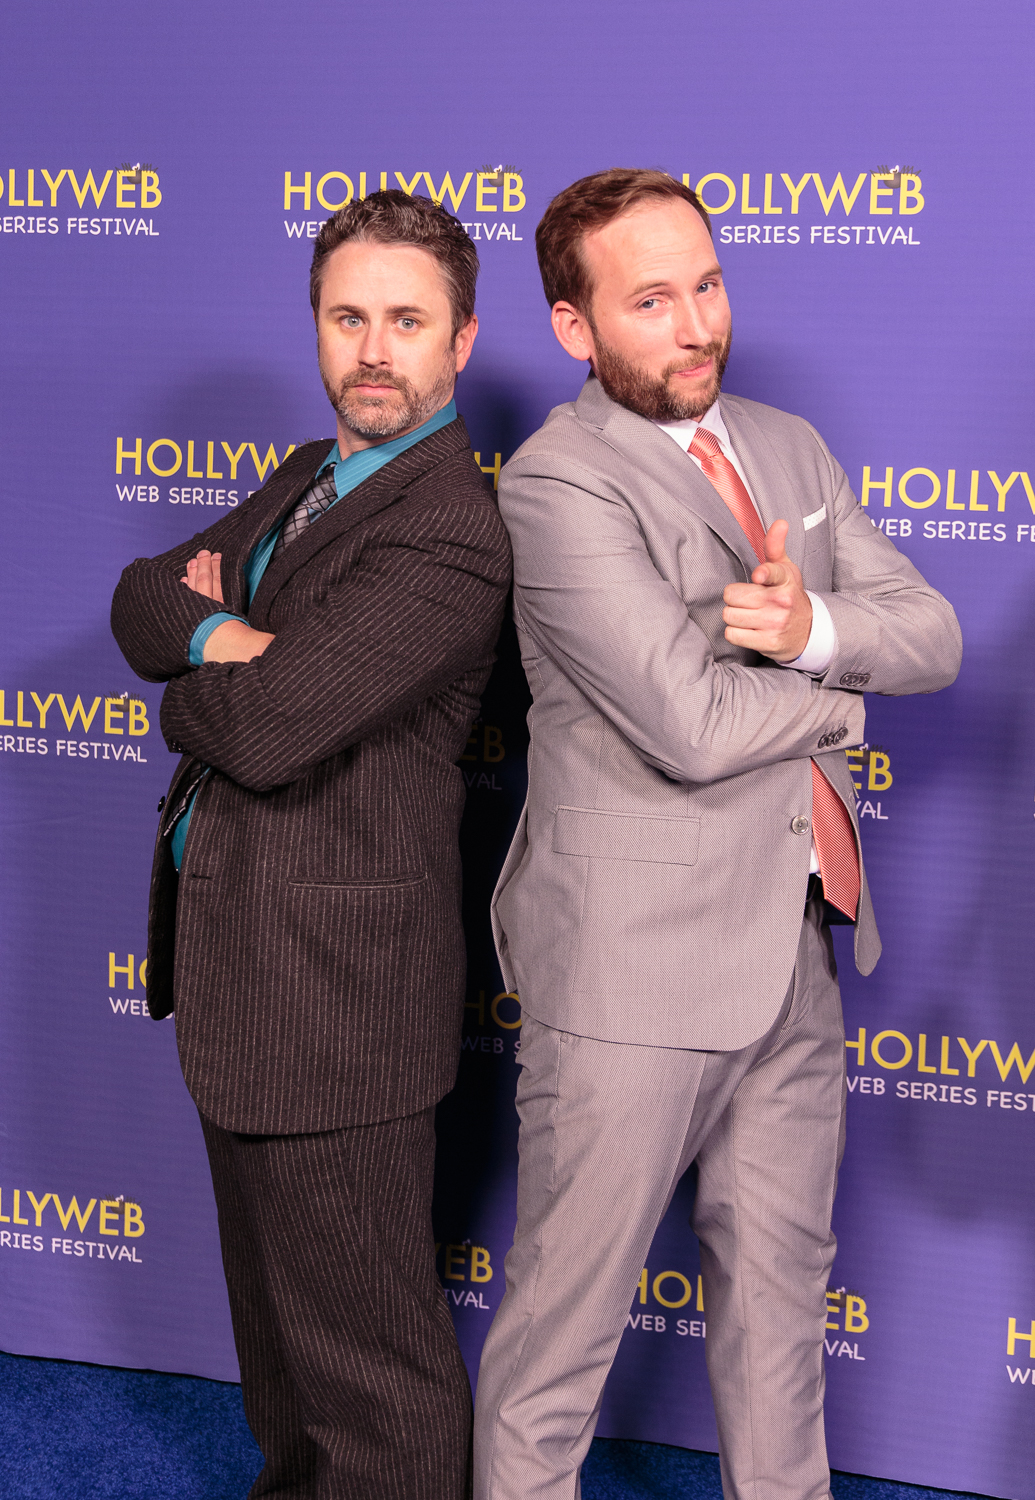 Ed Robinson with co-host Ron Hanks at the 2015 Hollweb Festival Awards